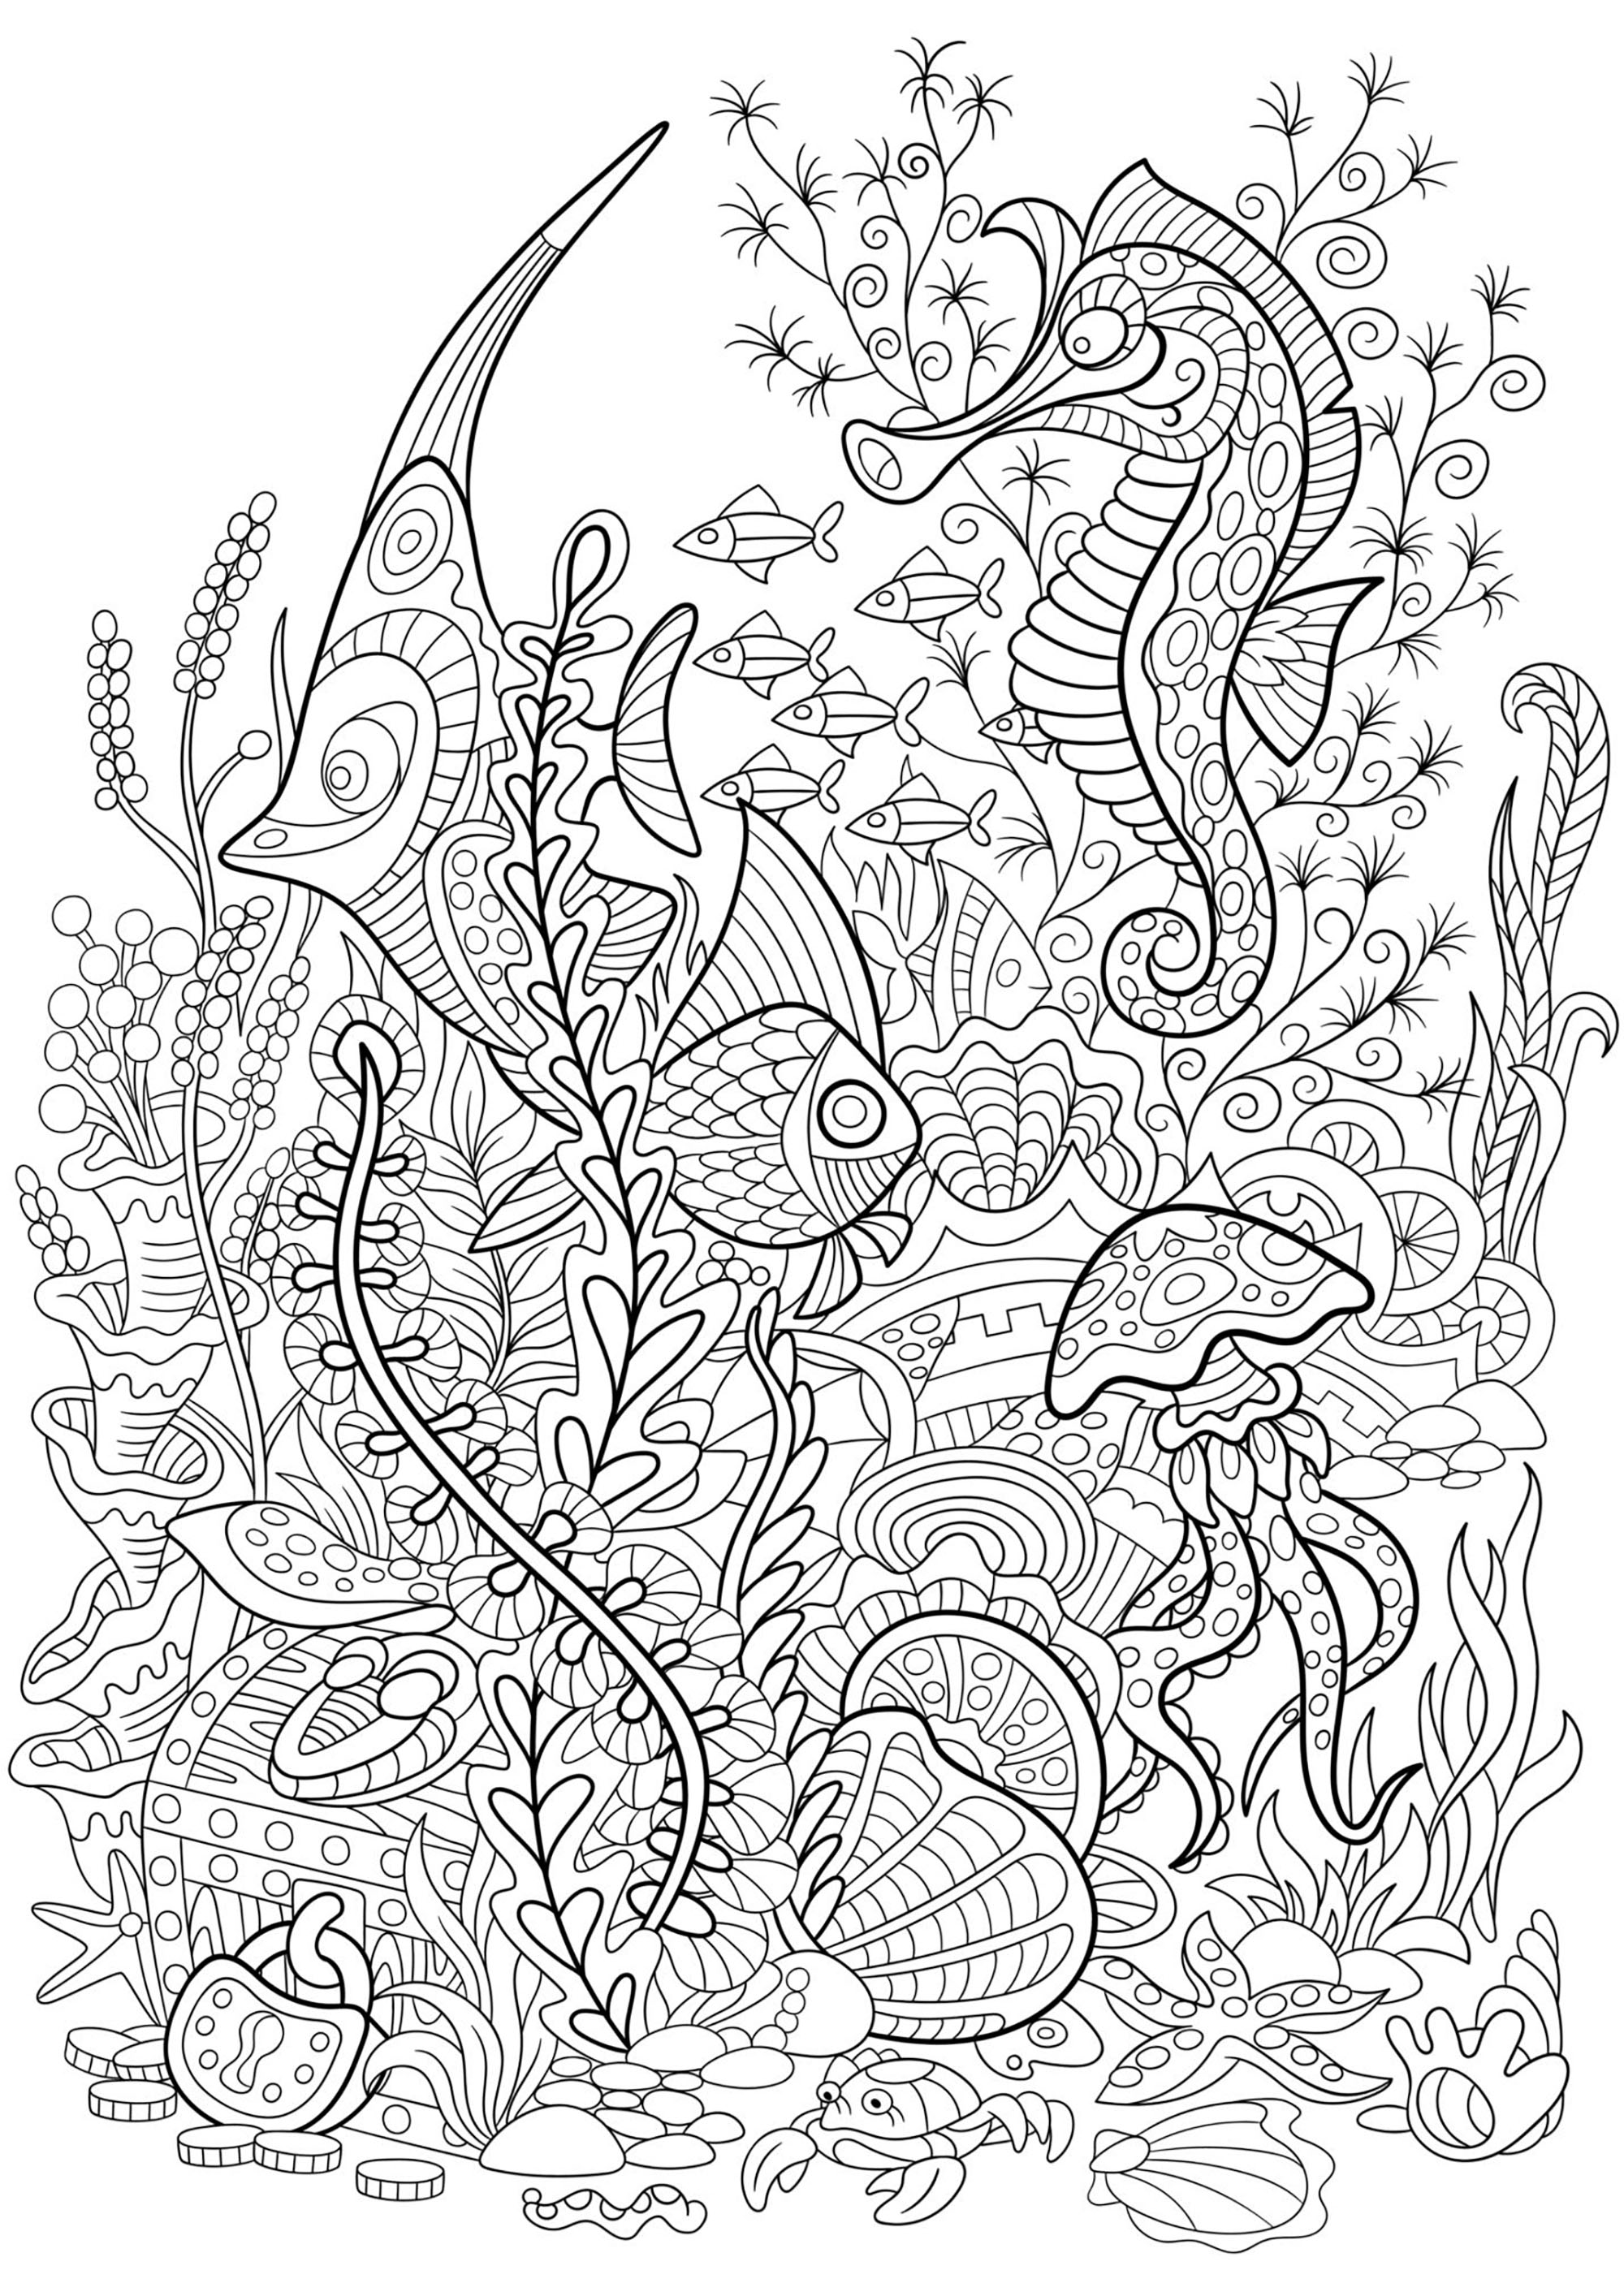 creation of the world coloring pages